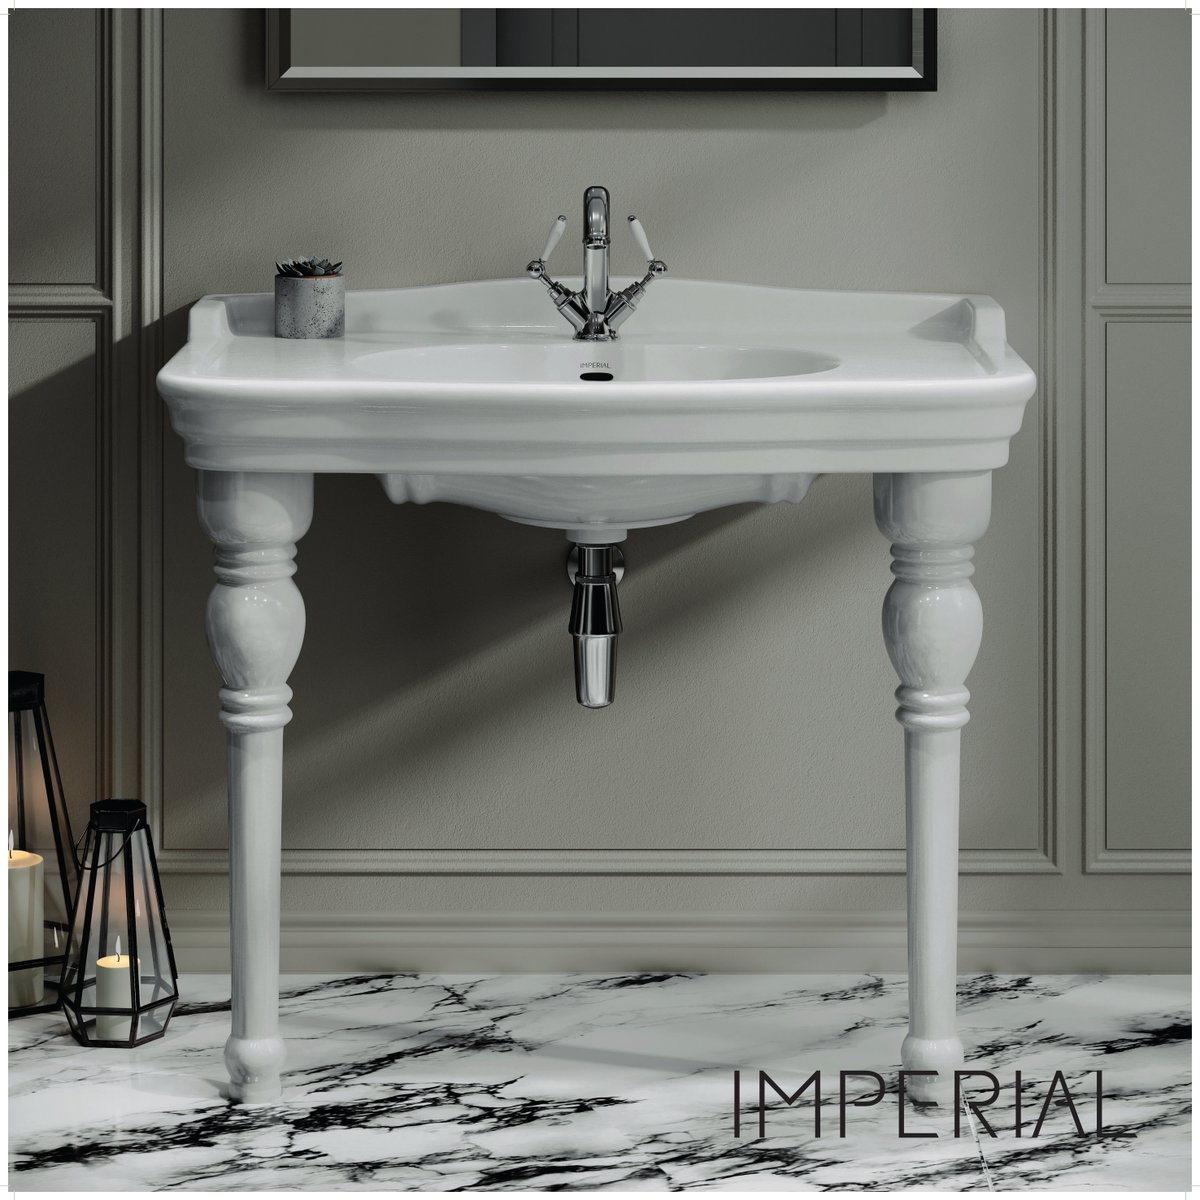 Combining soft mood lighting with our Regent Console adds the ultimate finishing touch to a boutique style bathroom #boutique #style imperial-bathrooms.co.uk